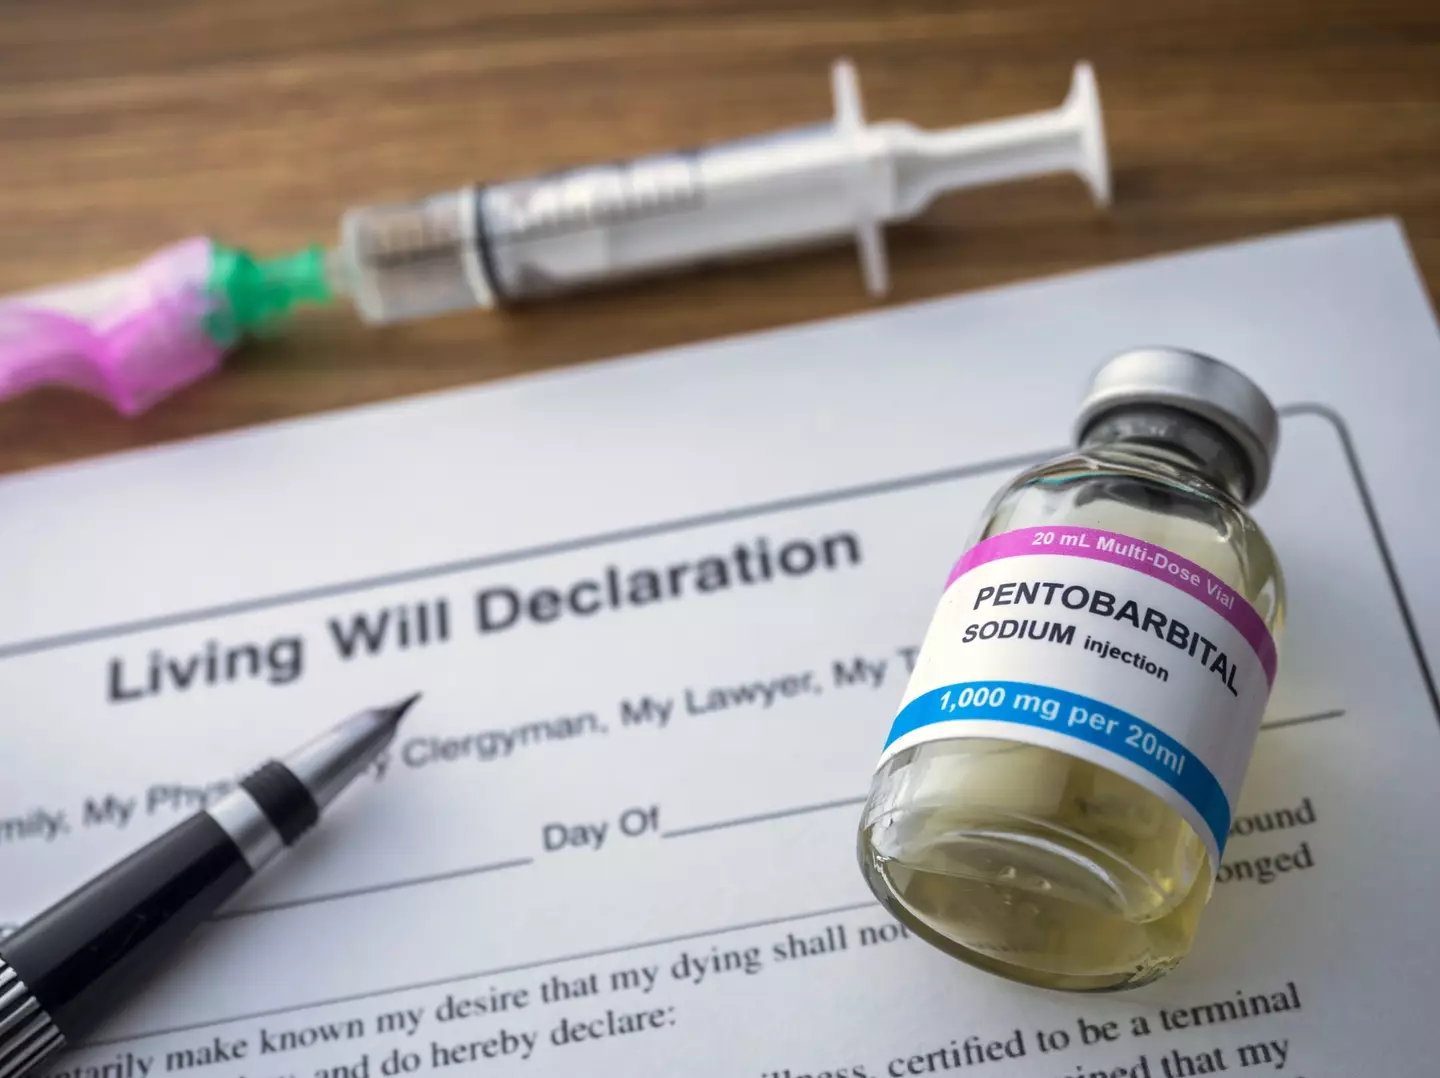 Doctor-assisted dying is legal in the Netherlands for psychiatric reasons. (DIGICOMPHOTO/SCIENCE PHOTO LIBRARY / Getty Images)